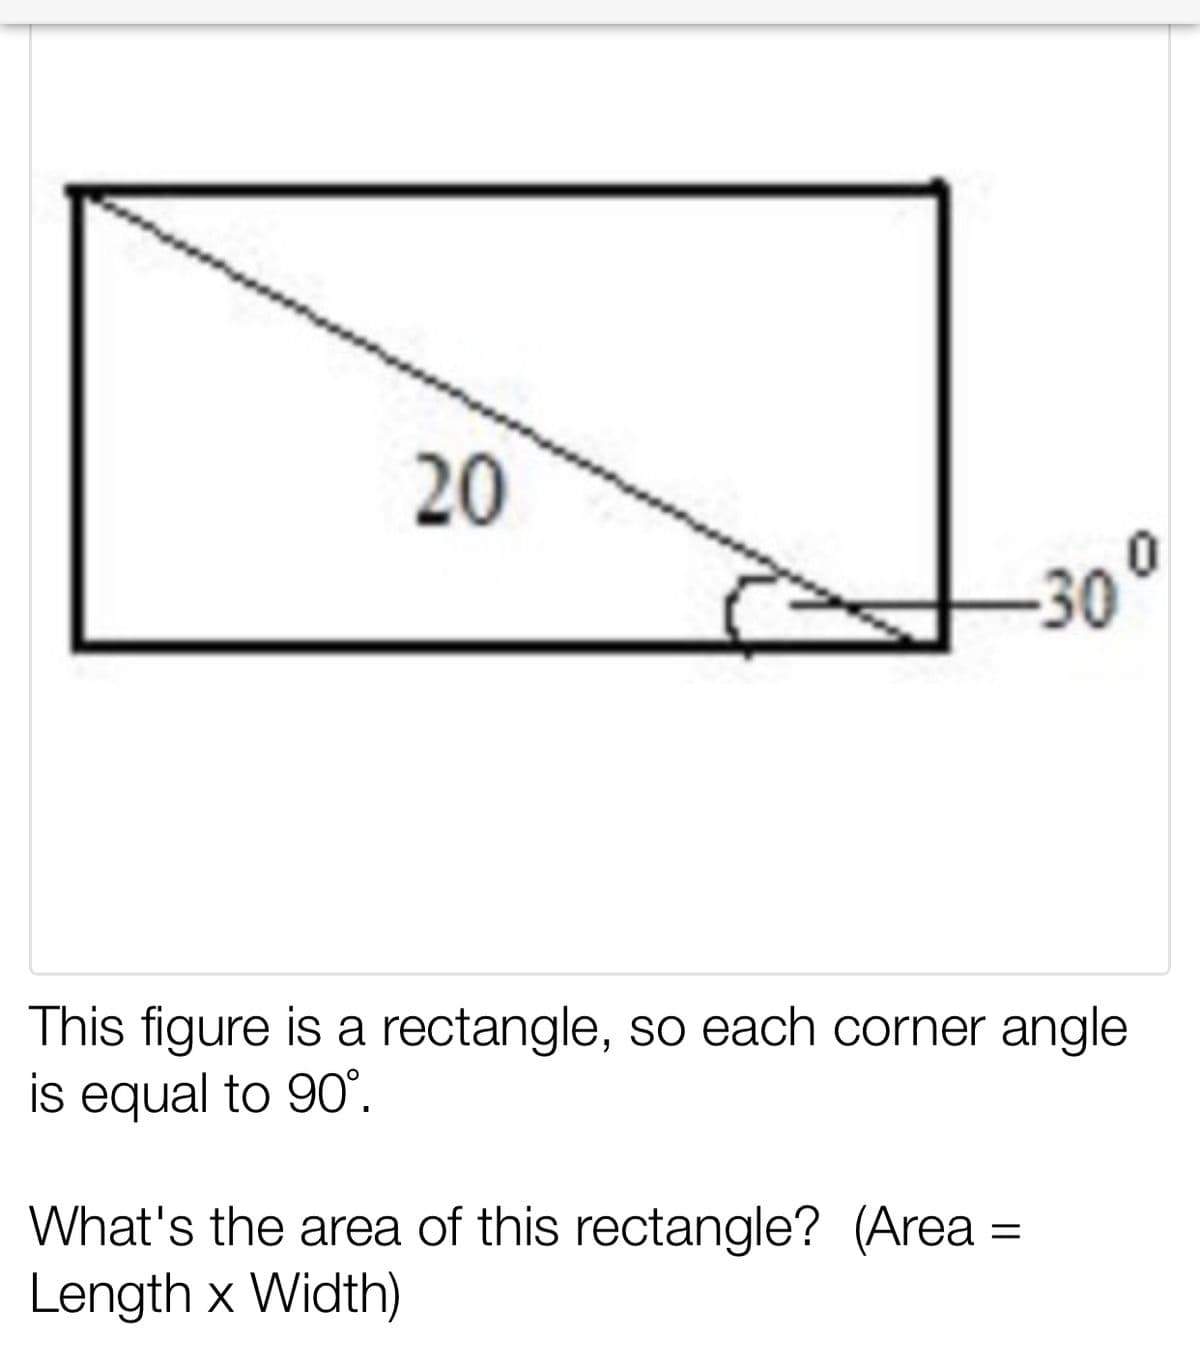 20
-30
This figure is a rectangle, so each corner angle
is equal to 90°.
What's the area of this rectangle? (Area
Length x Width)
